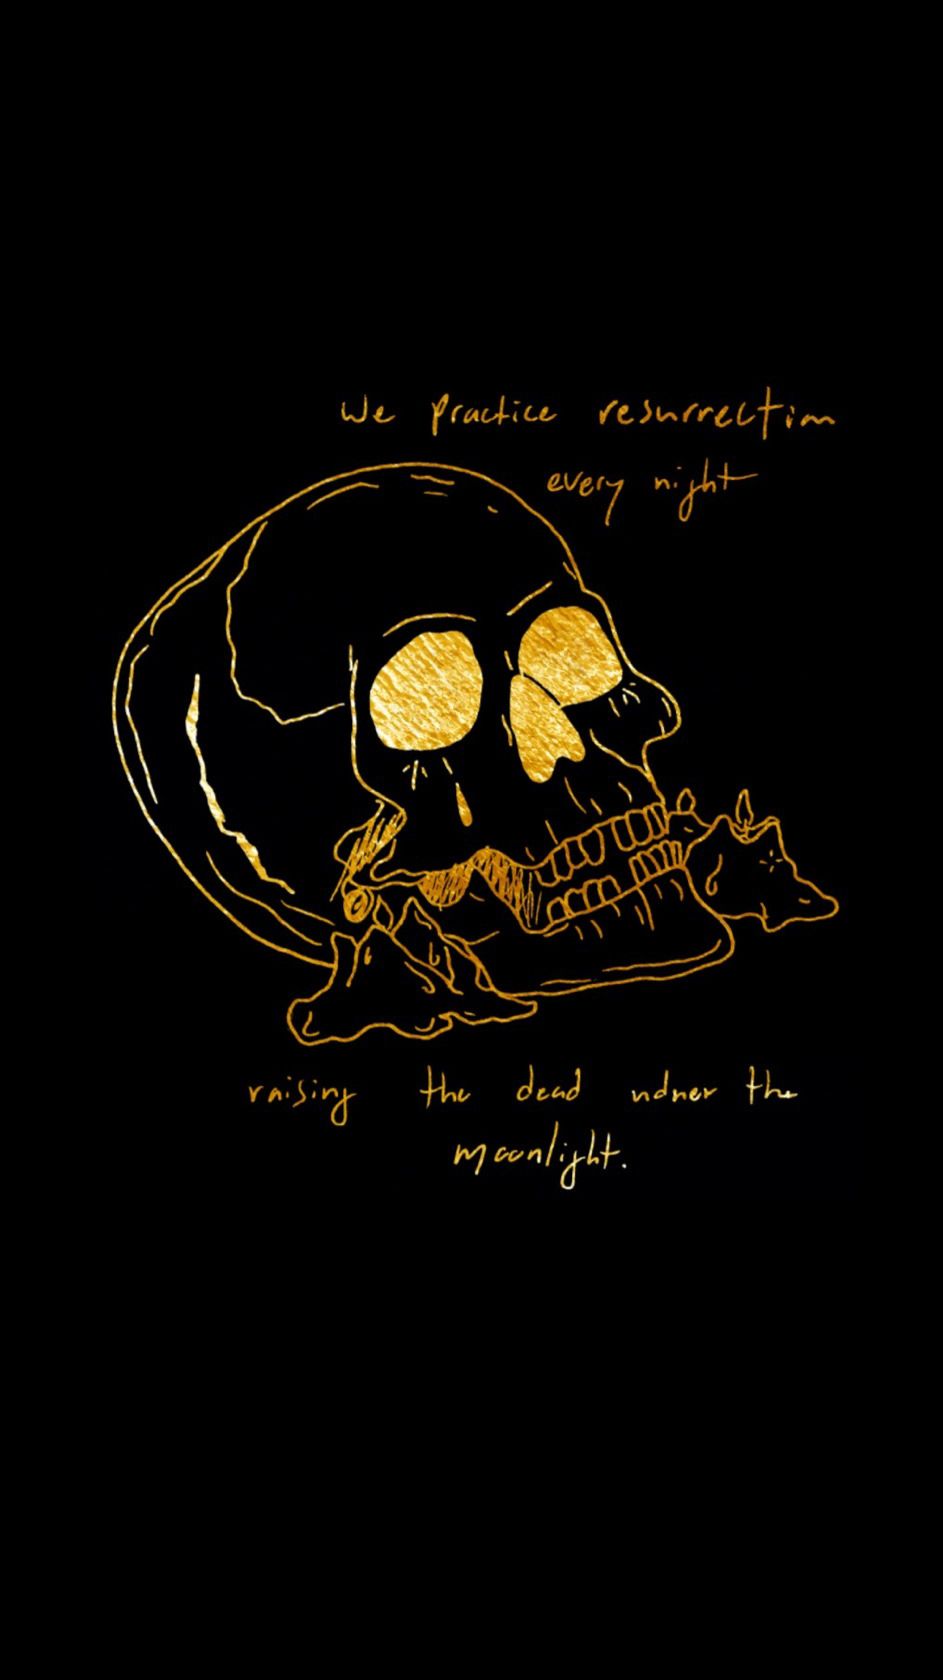 A skull with yellow and black ink - Black